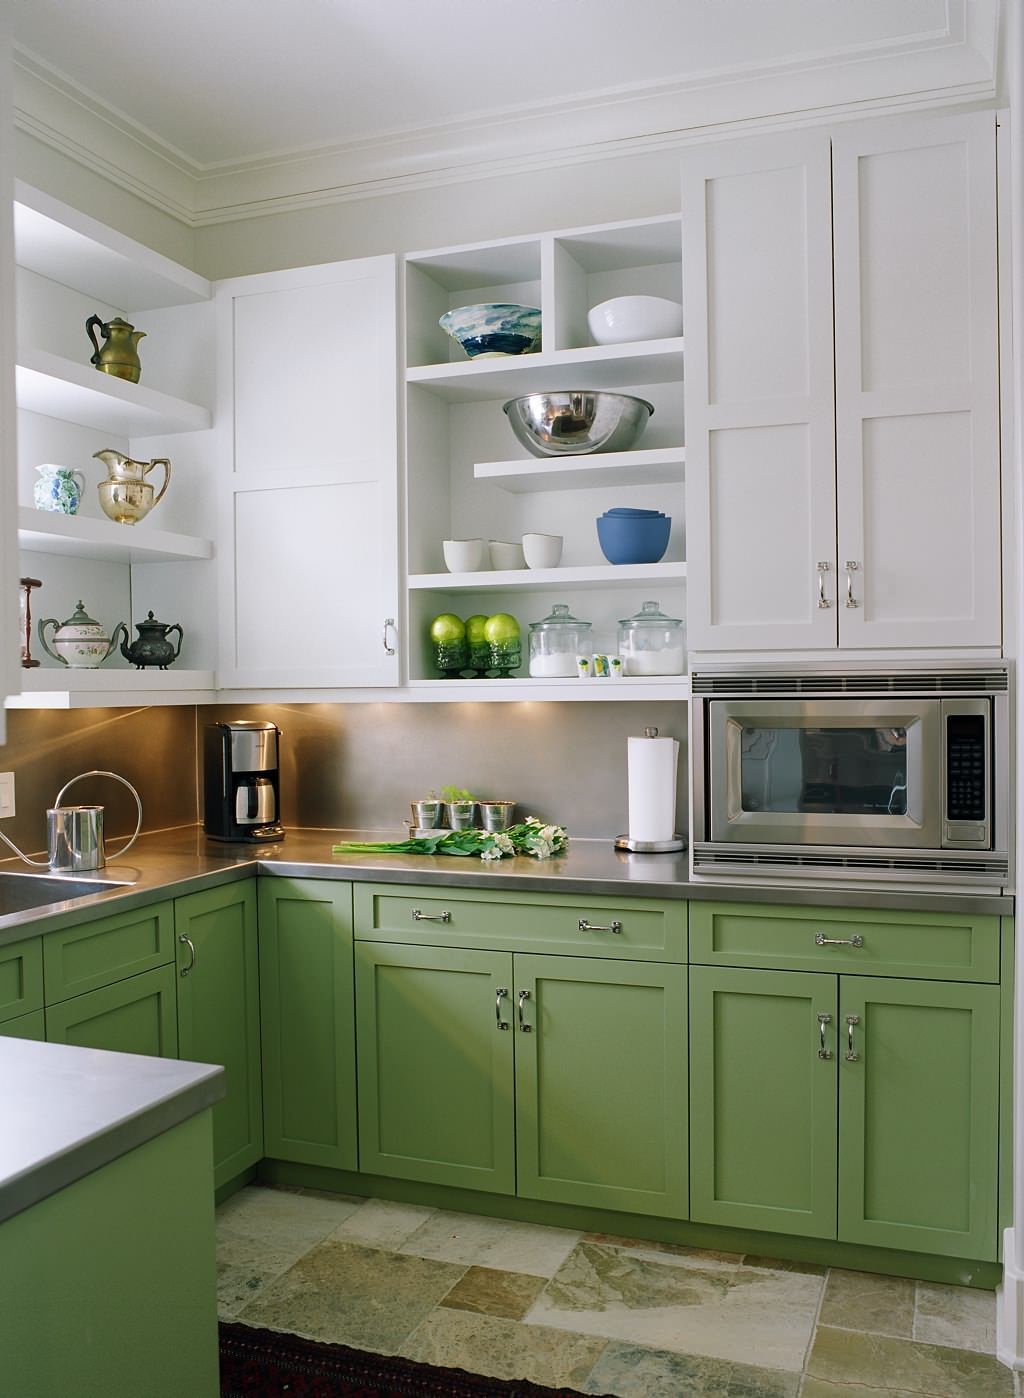 A Small Appliance Microwave In A Green Kitchen With Cream Colored Cabinets  In A New Construction Home With Granite Countertops And Lots Of Cabinets  And Storage Space Stock Photo - Download Image